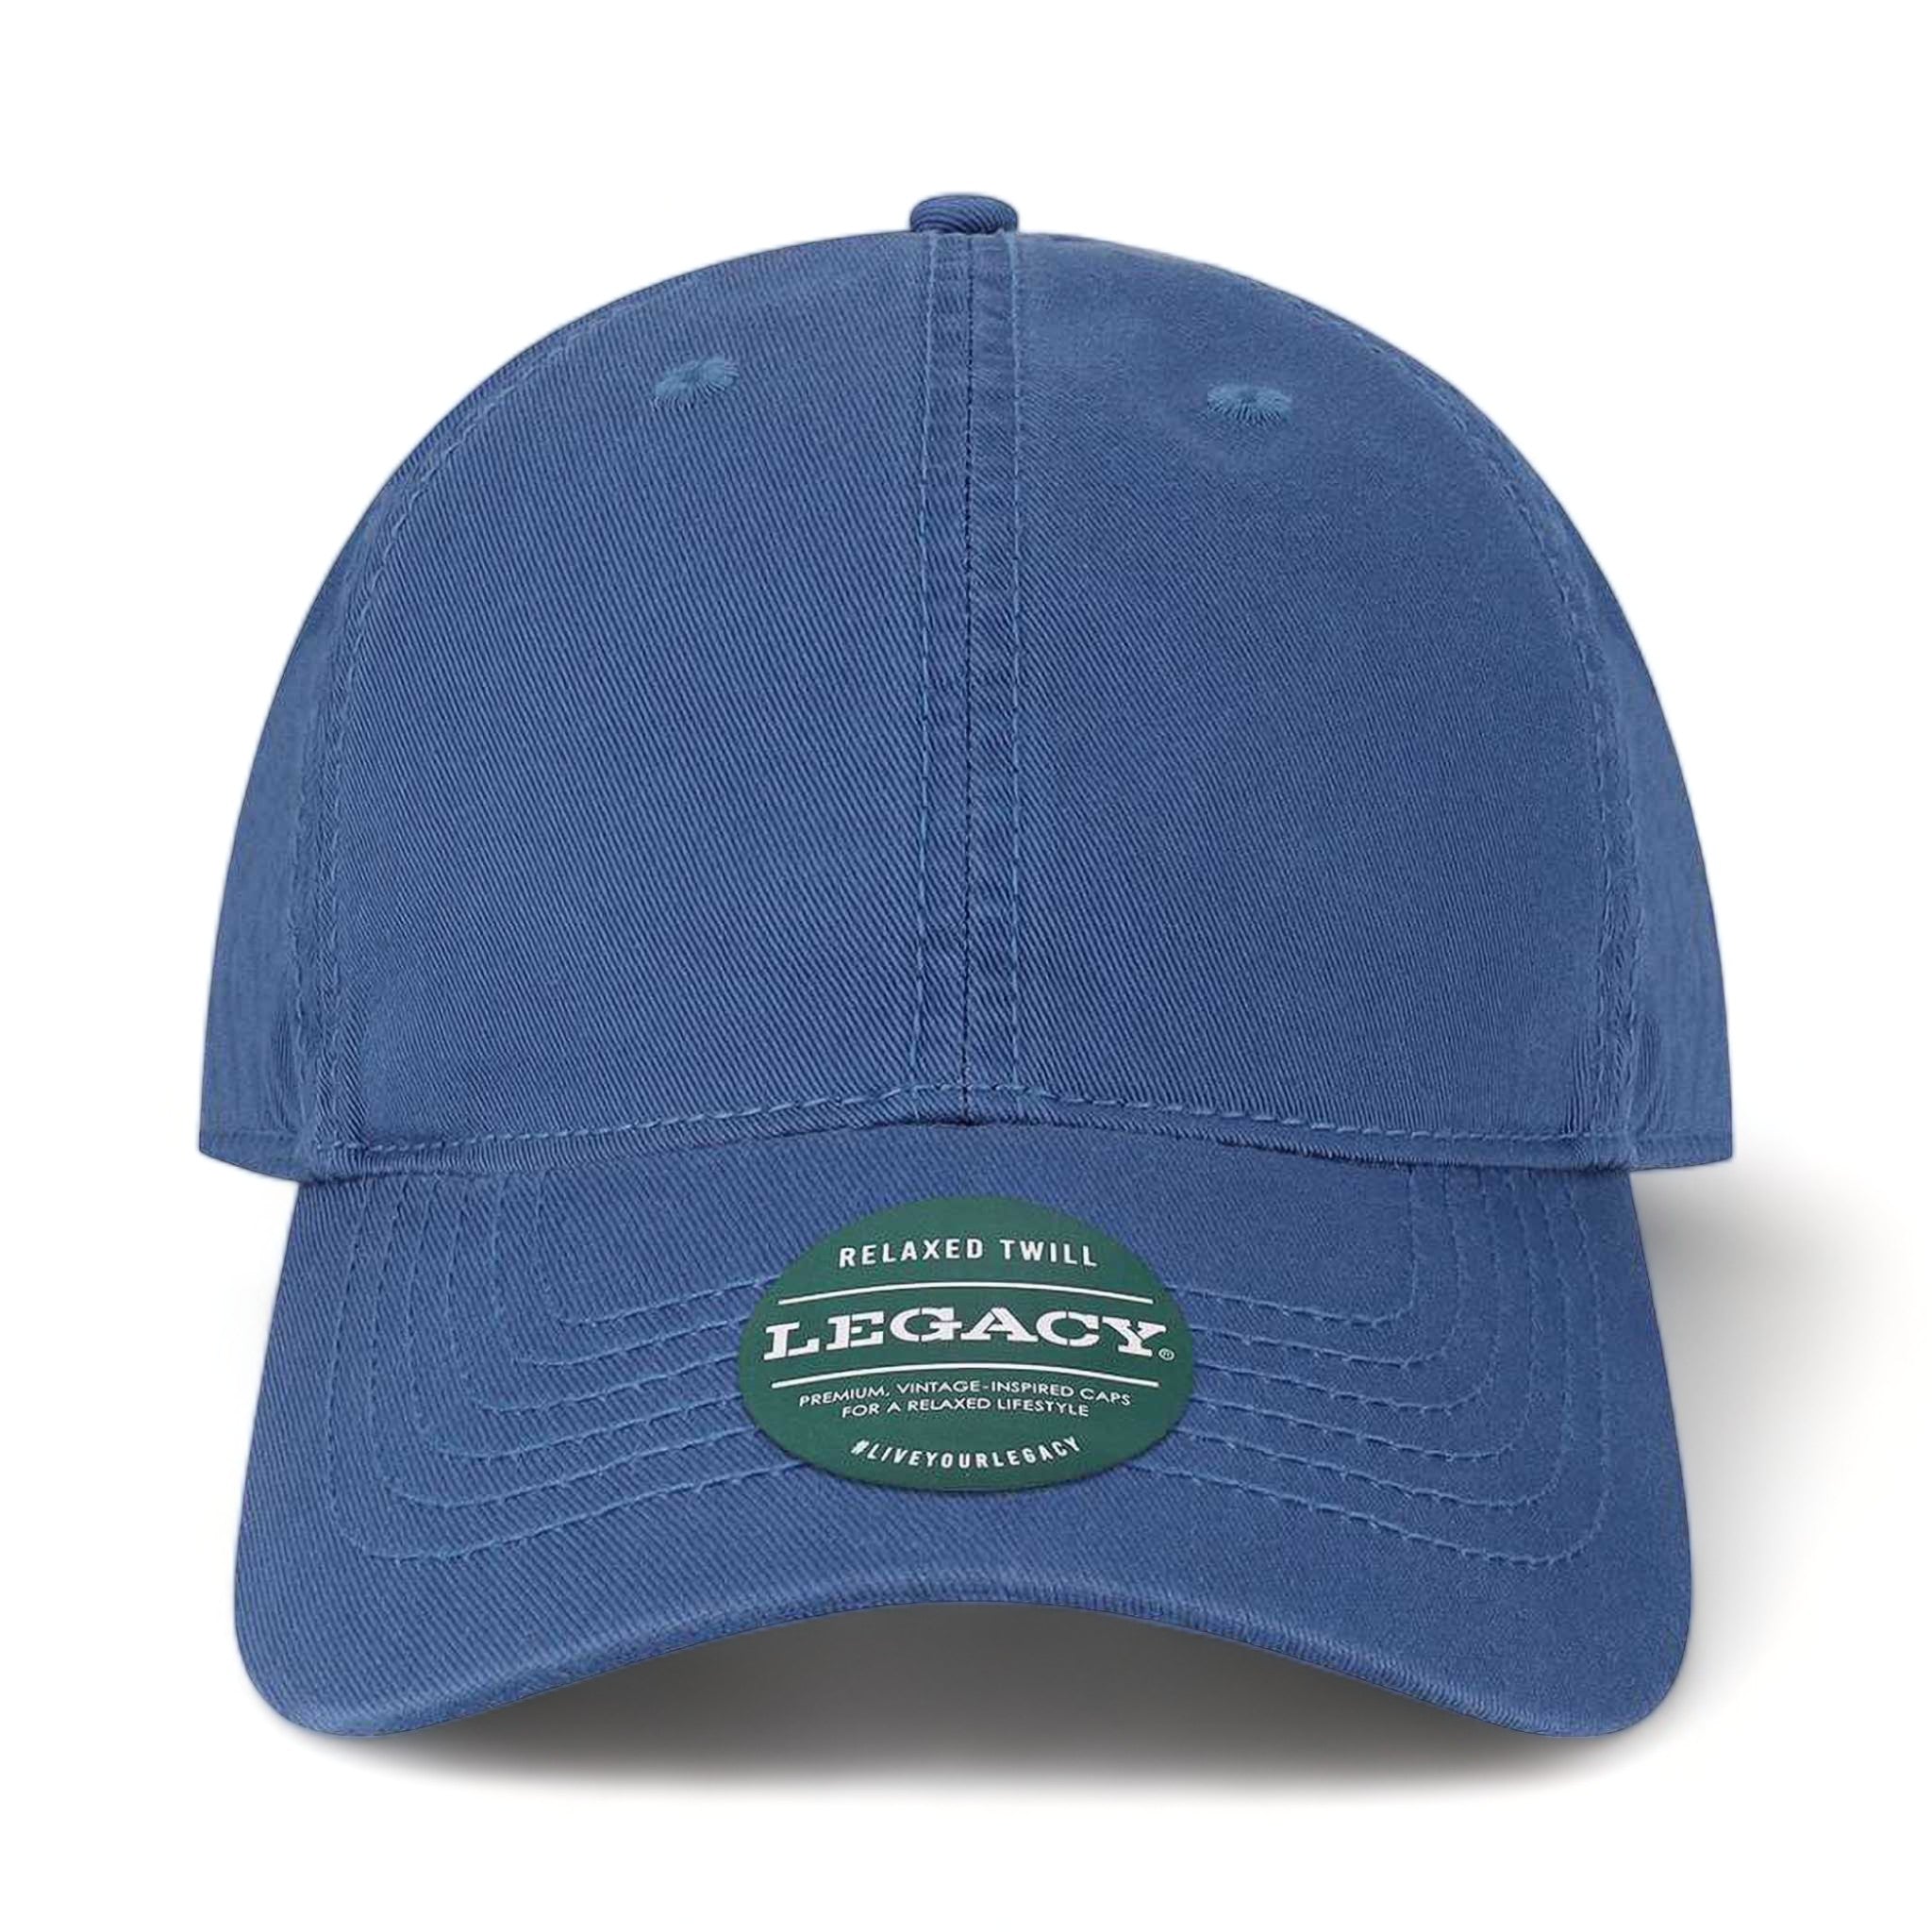 Front view of LEGACY EZA custom hat in royal